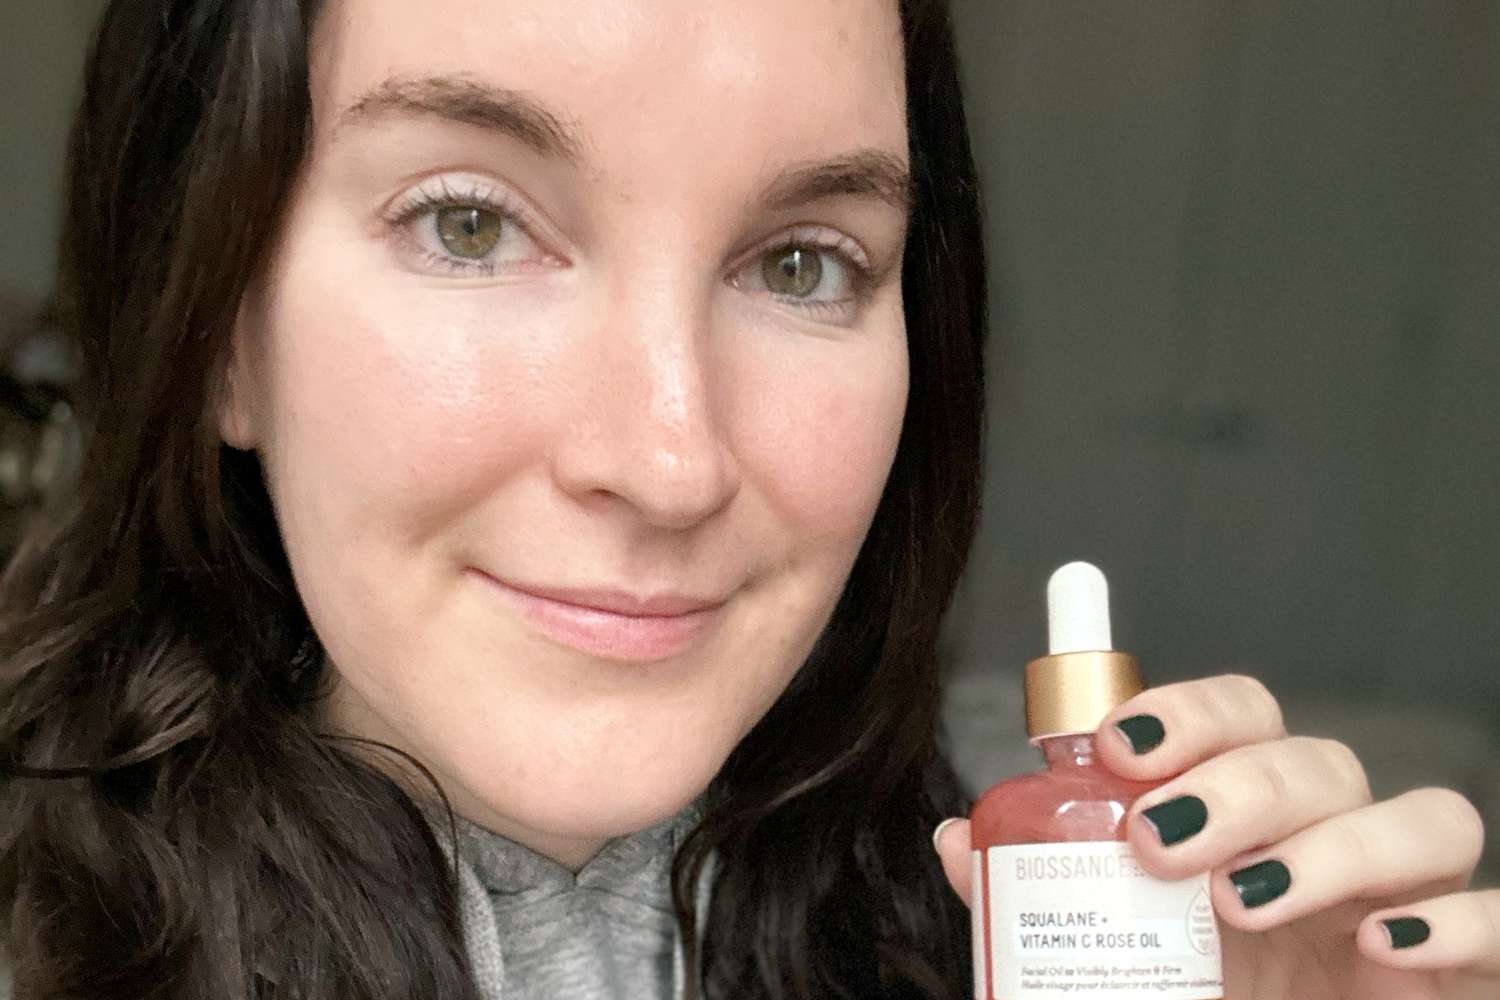 Person smiling and holding Biossance Squalane + Vitamin C Rose Firming Oil next to face